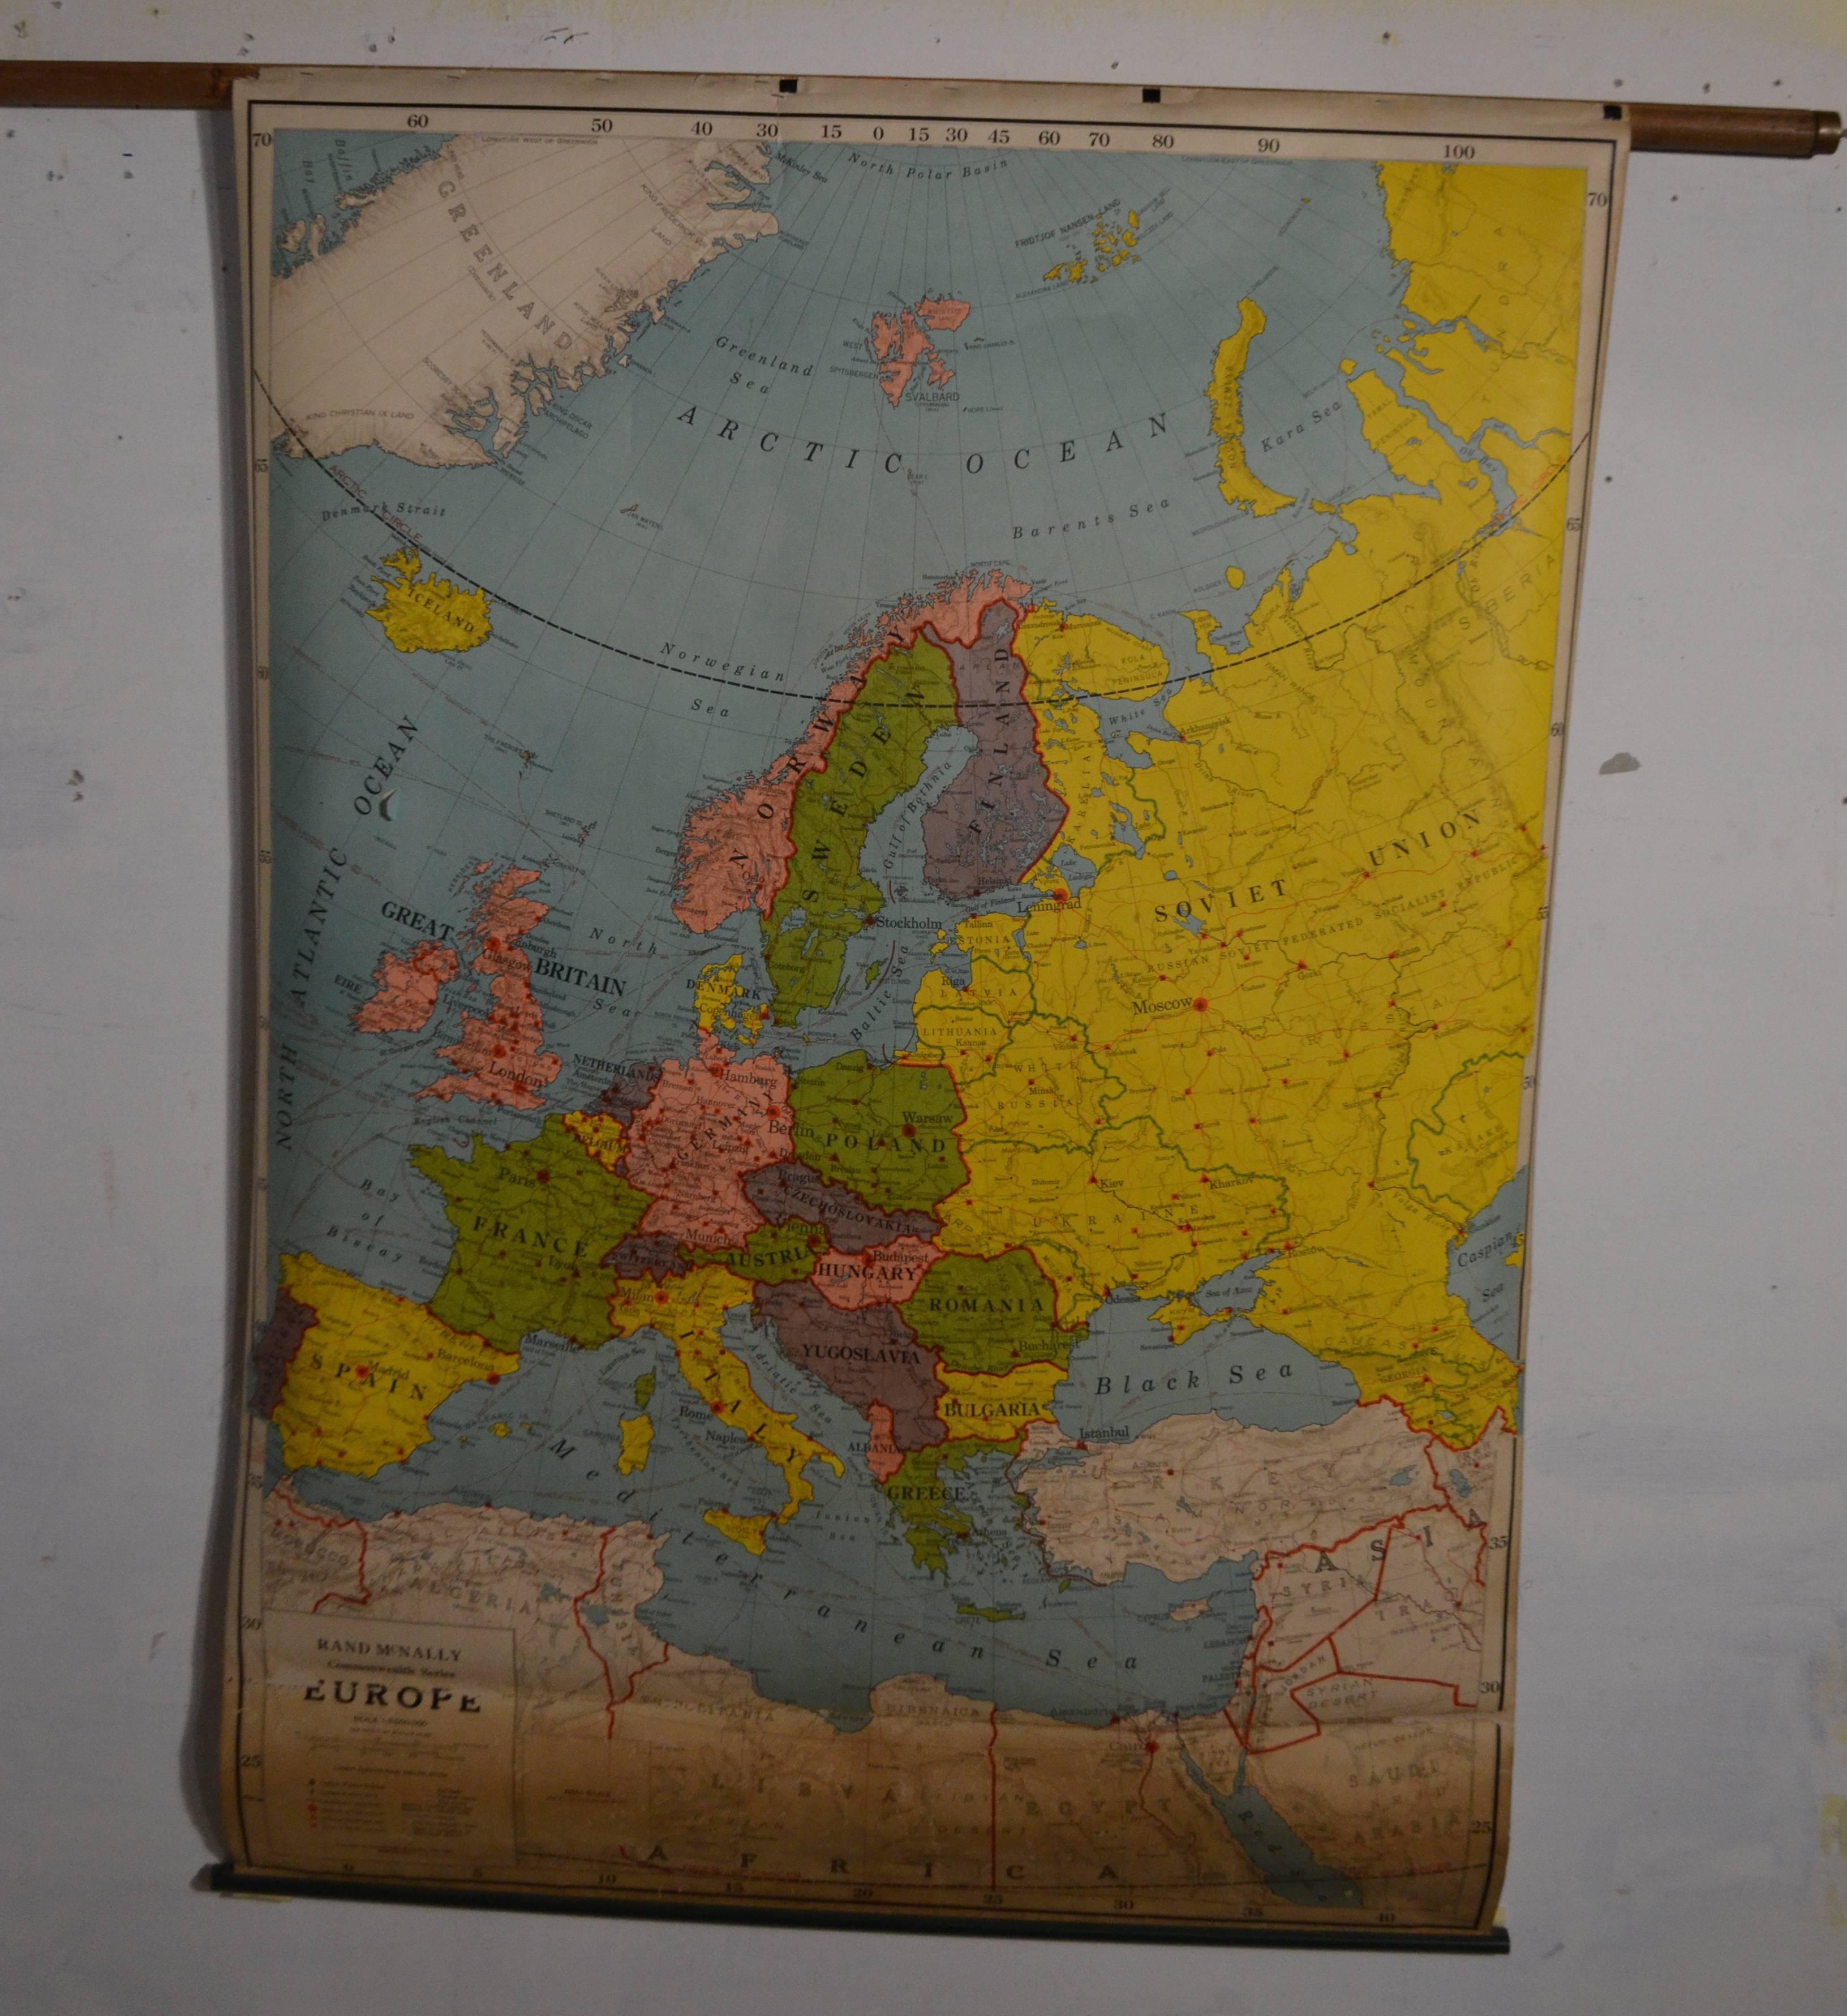 Map of Europe on retractable roller. Vivid colors. Engraved and printed in Scotland. Pre-World War II.